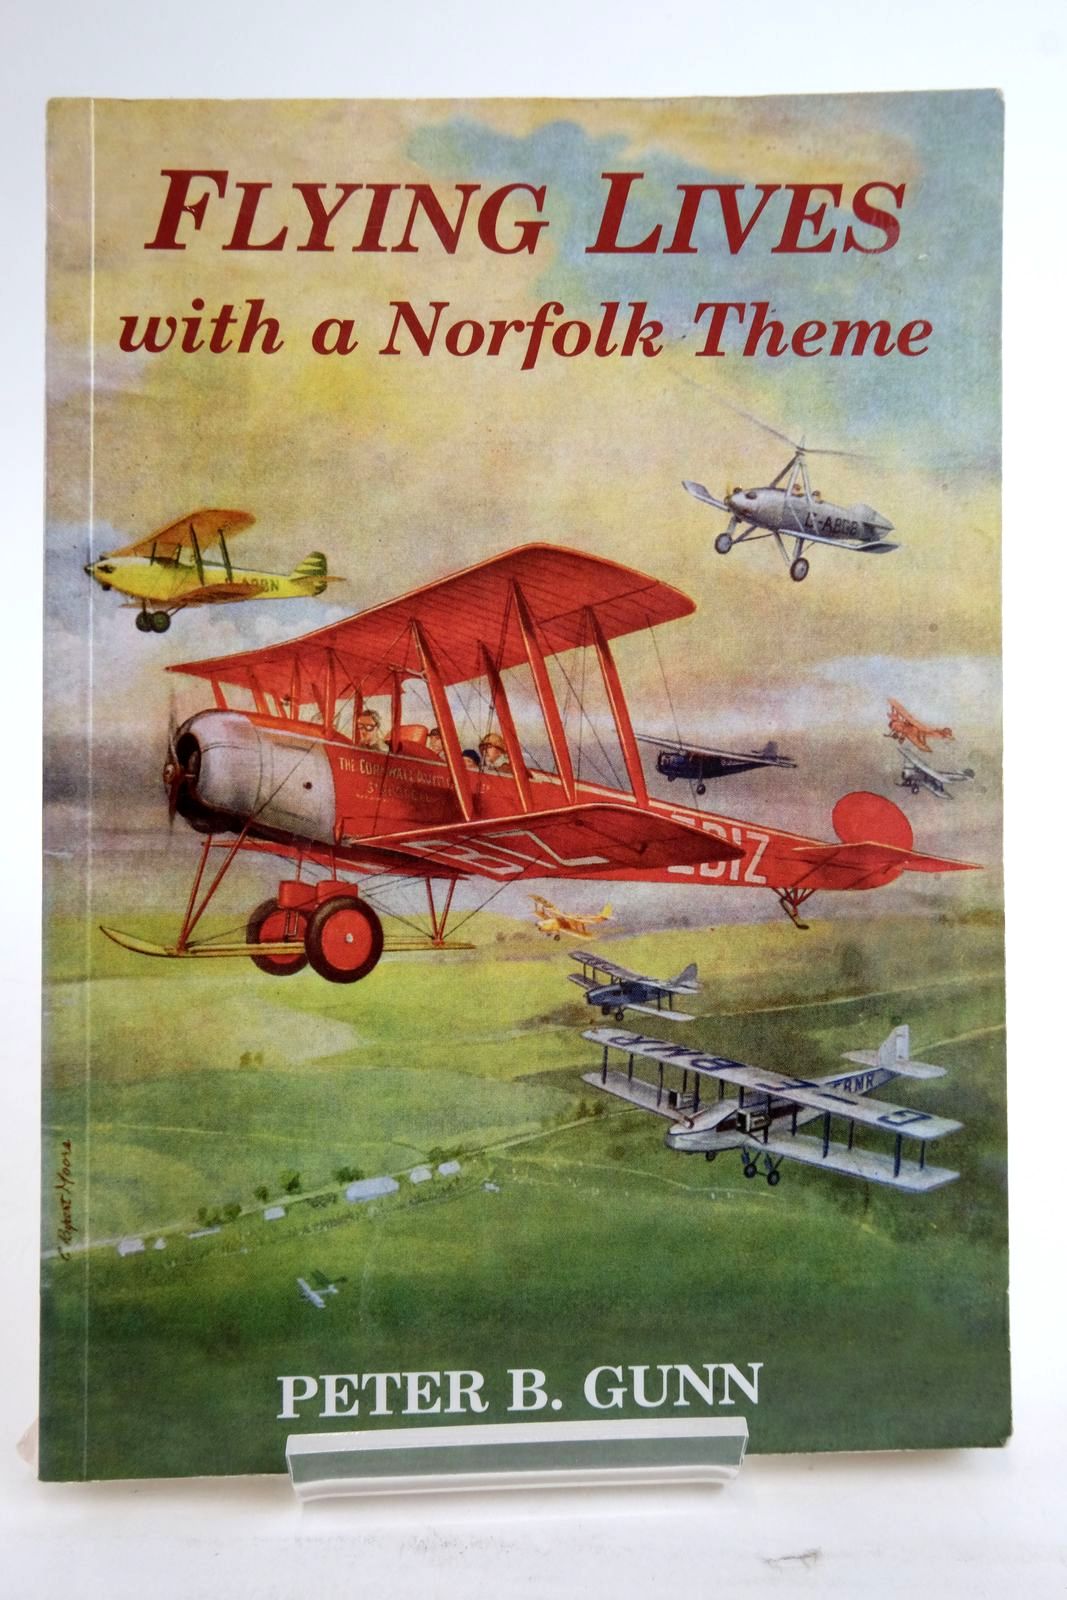 Photo of FLYING LIVES WITH A NORFOLK THEME written by Gunn, Peter B. published by Peter B. Gunn (STOCK CODE: 2136267)  for sale by Stella & Rose's Books